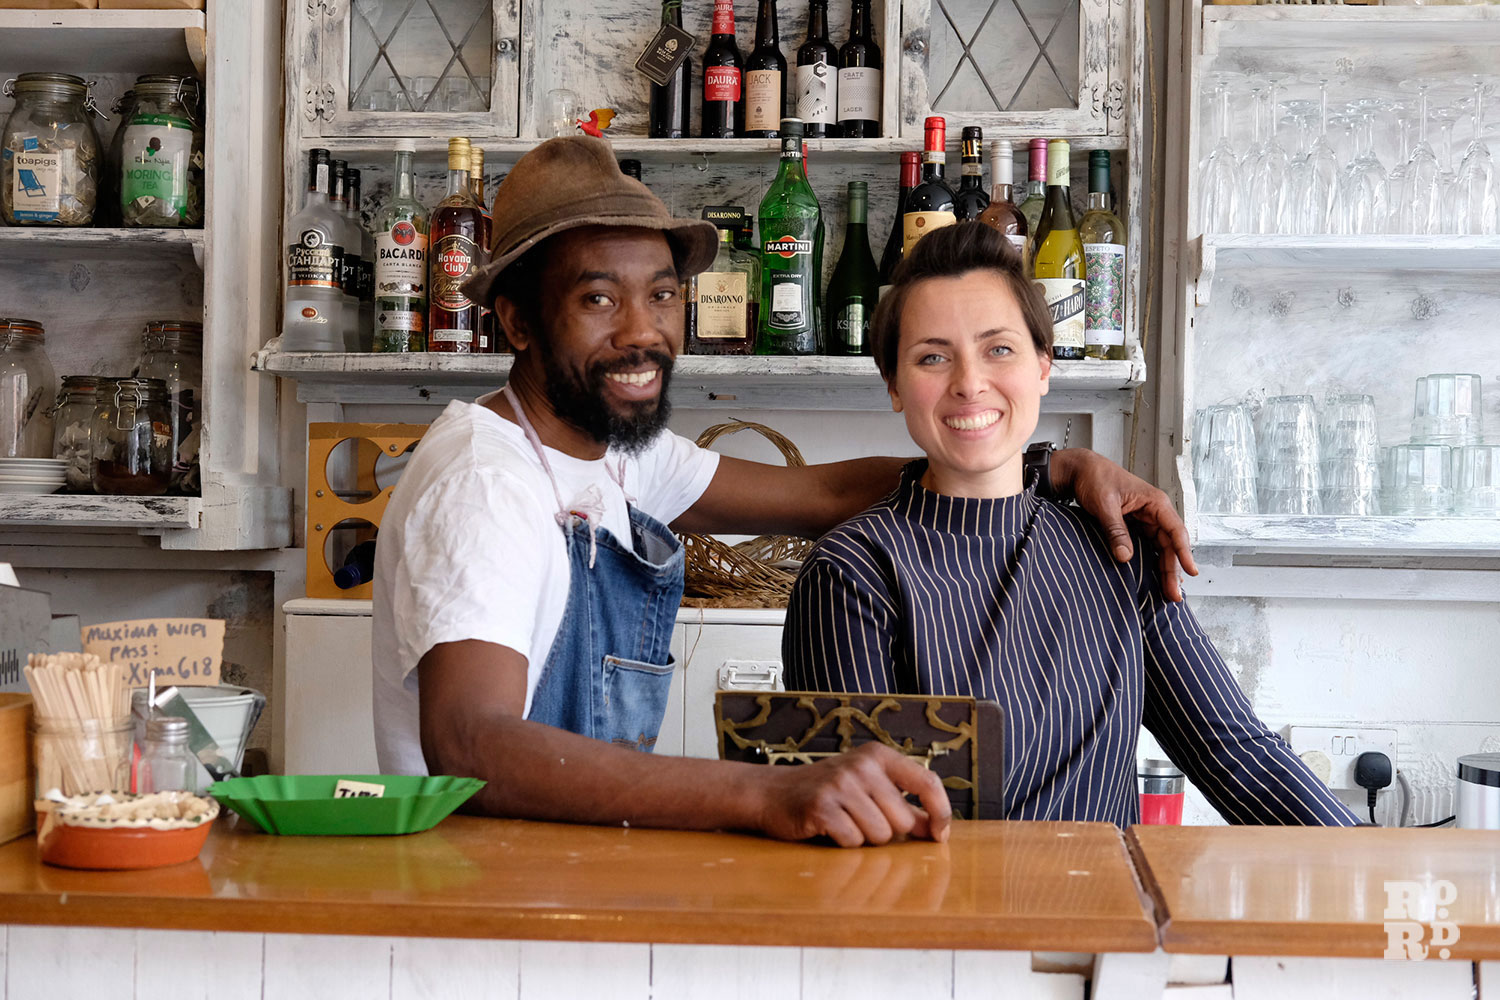 Co-owners of Muxima restaurant stand behind deli counter smiling